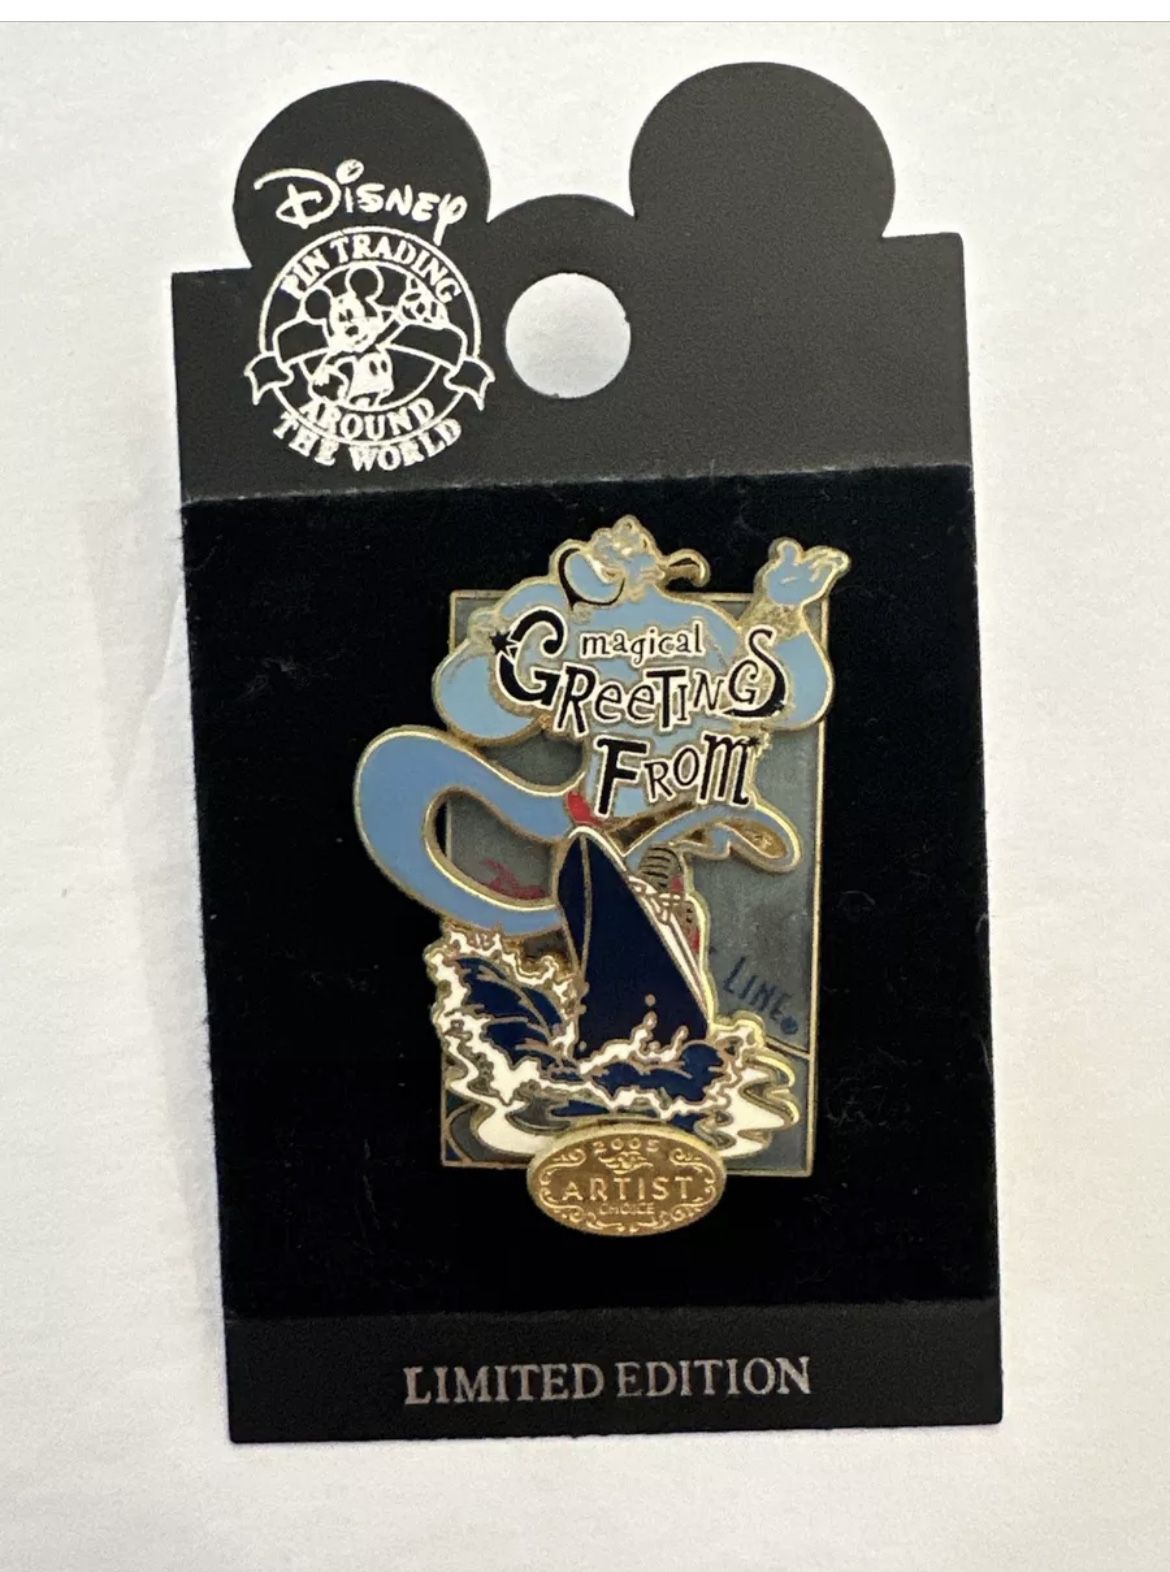 Disney DCL LE Pin Aladdin Genie Magical Greetings From Disney Cruise Line